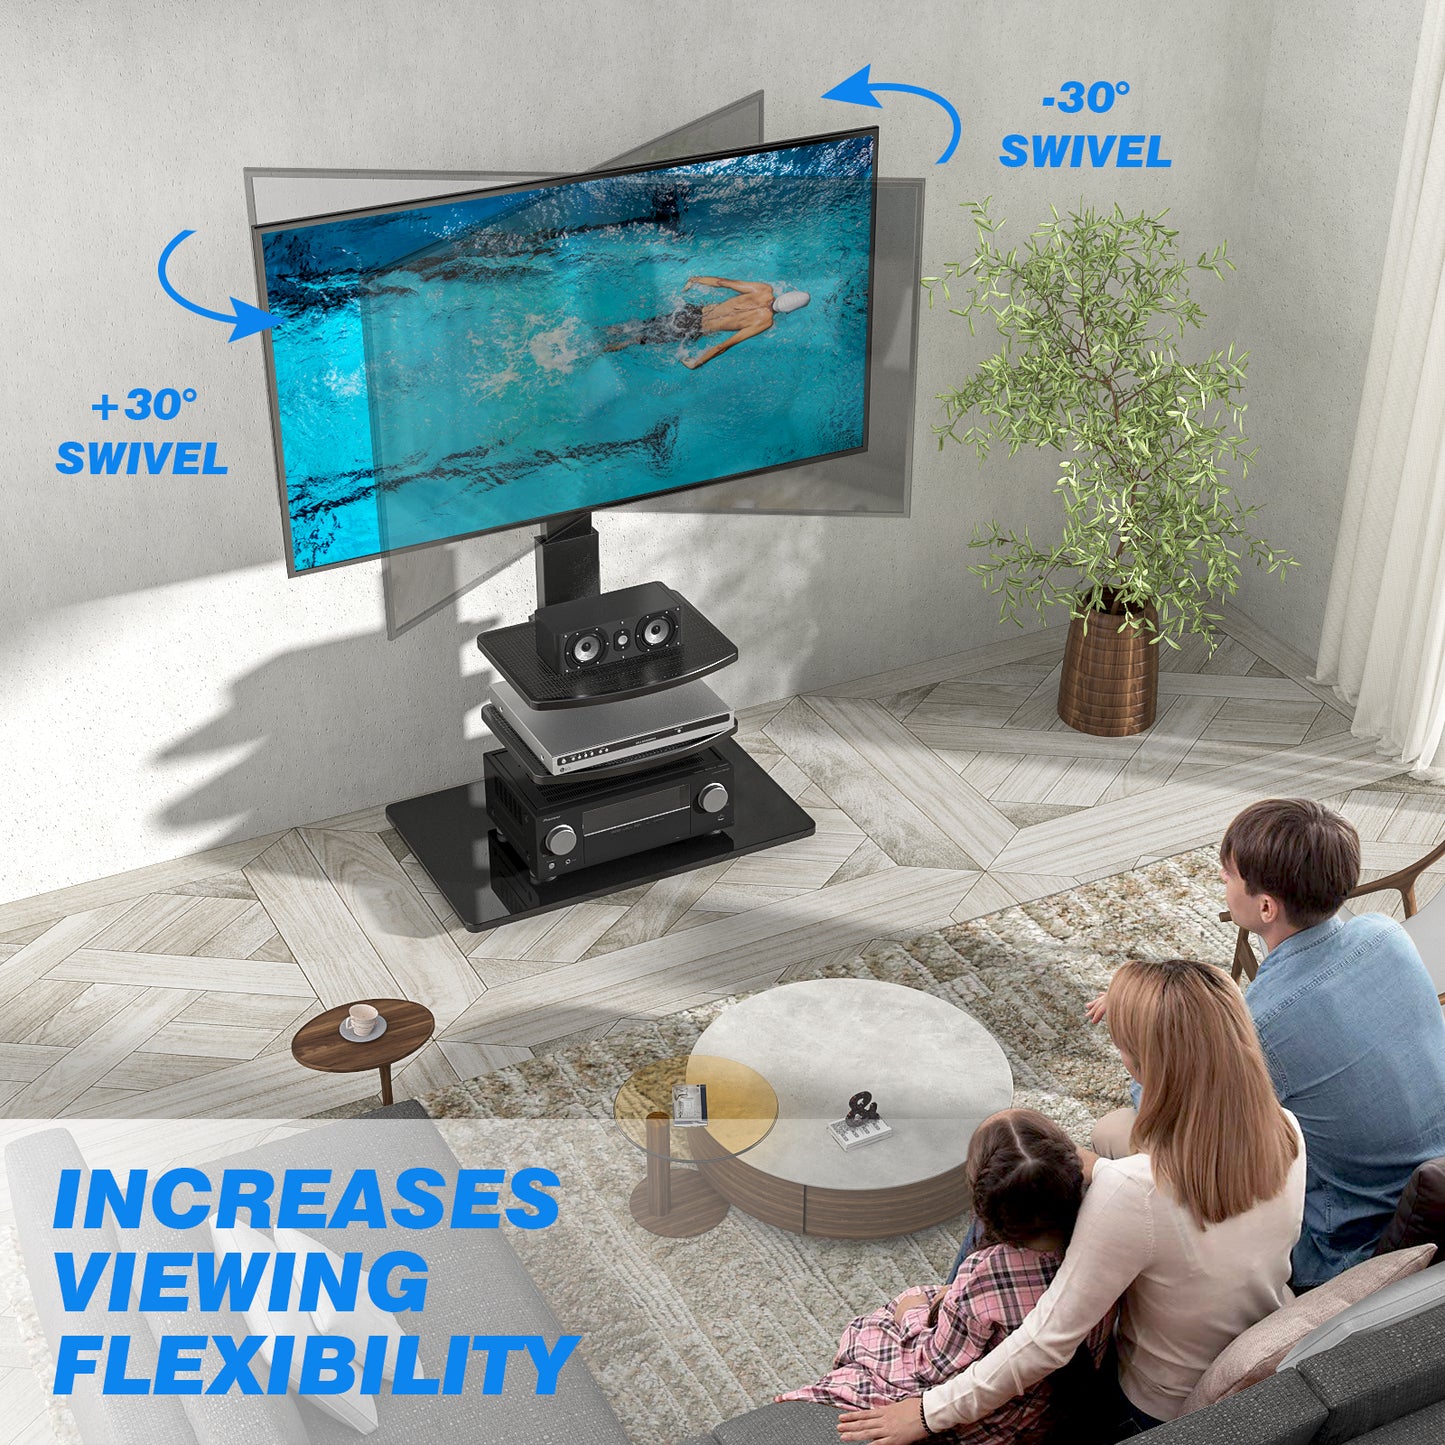 RFIVER Freestanding Swivel Floor TV Stand Tall TV Unit for 32 35 40 42 43 49 50 55 58 60 65 70 inch LCD/LED Flat Curved Screen Height Adjustable with 3-Tier Shelves Max VESA 400x400mm up to 50kgs